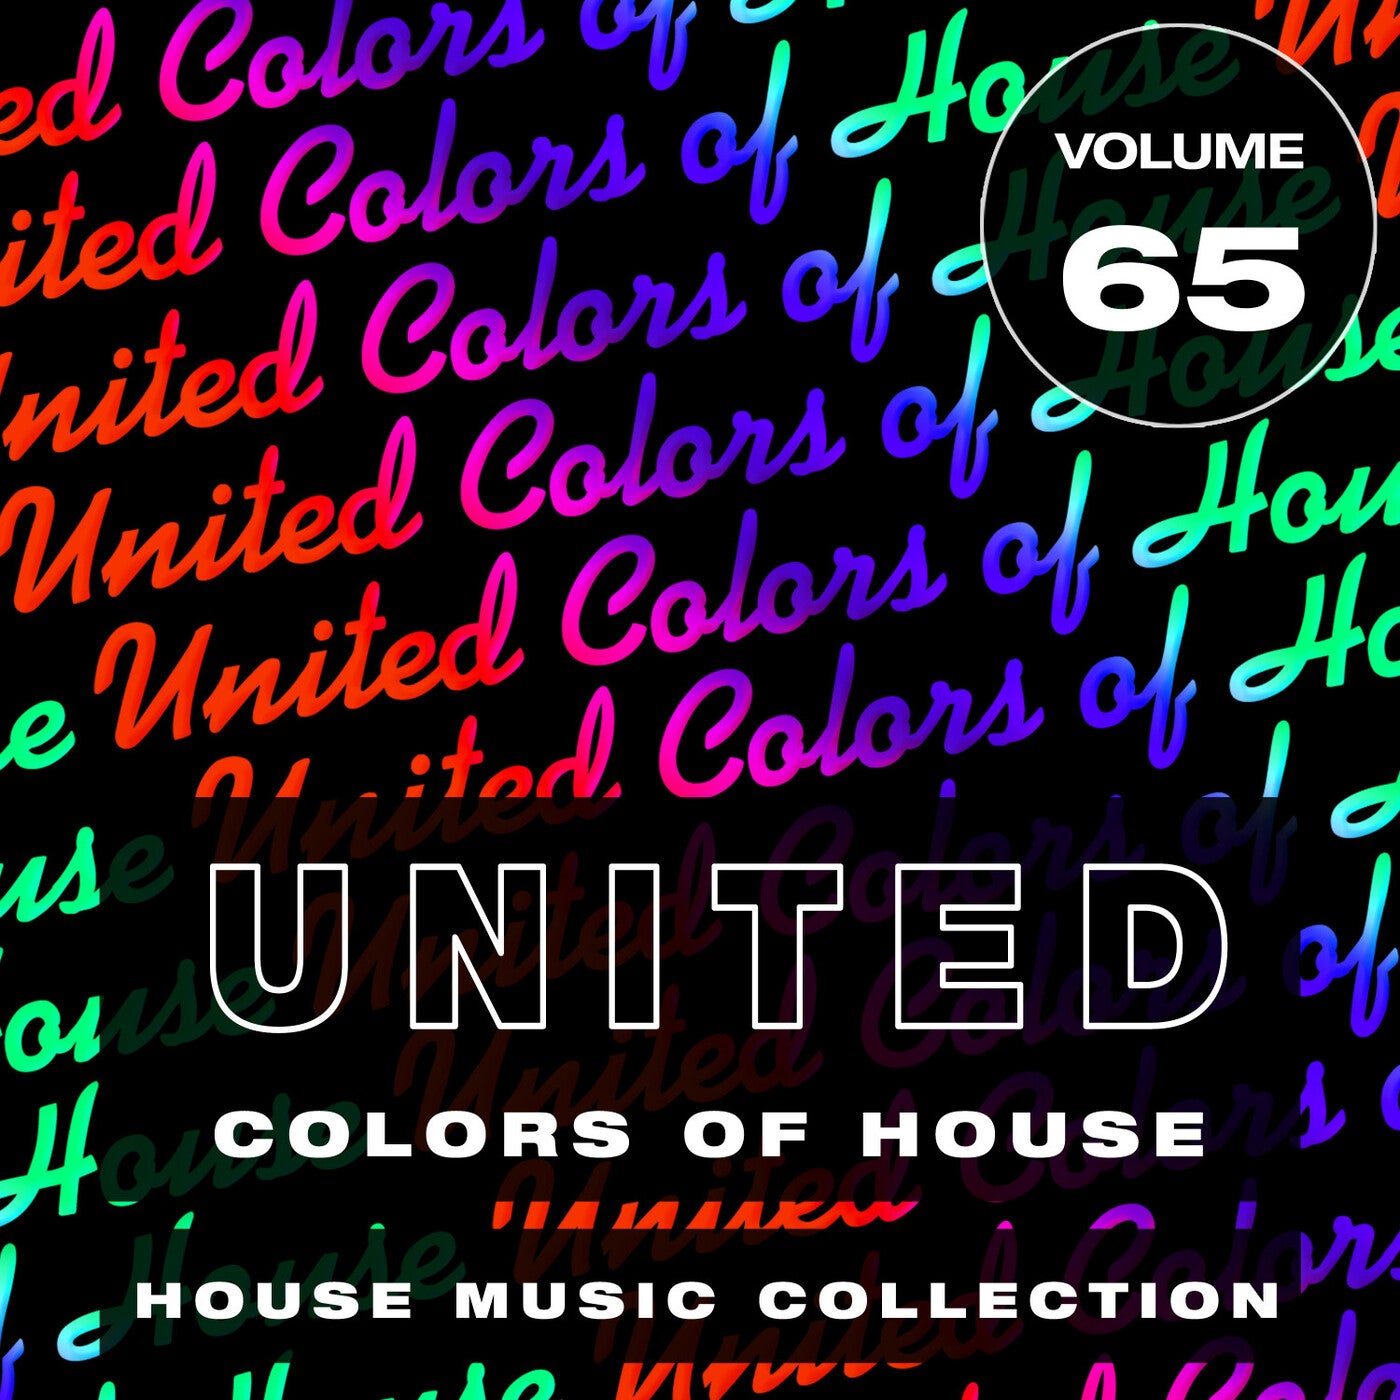 United Colors Of House Vol. 65